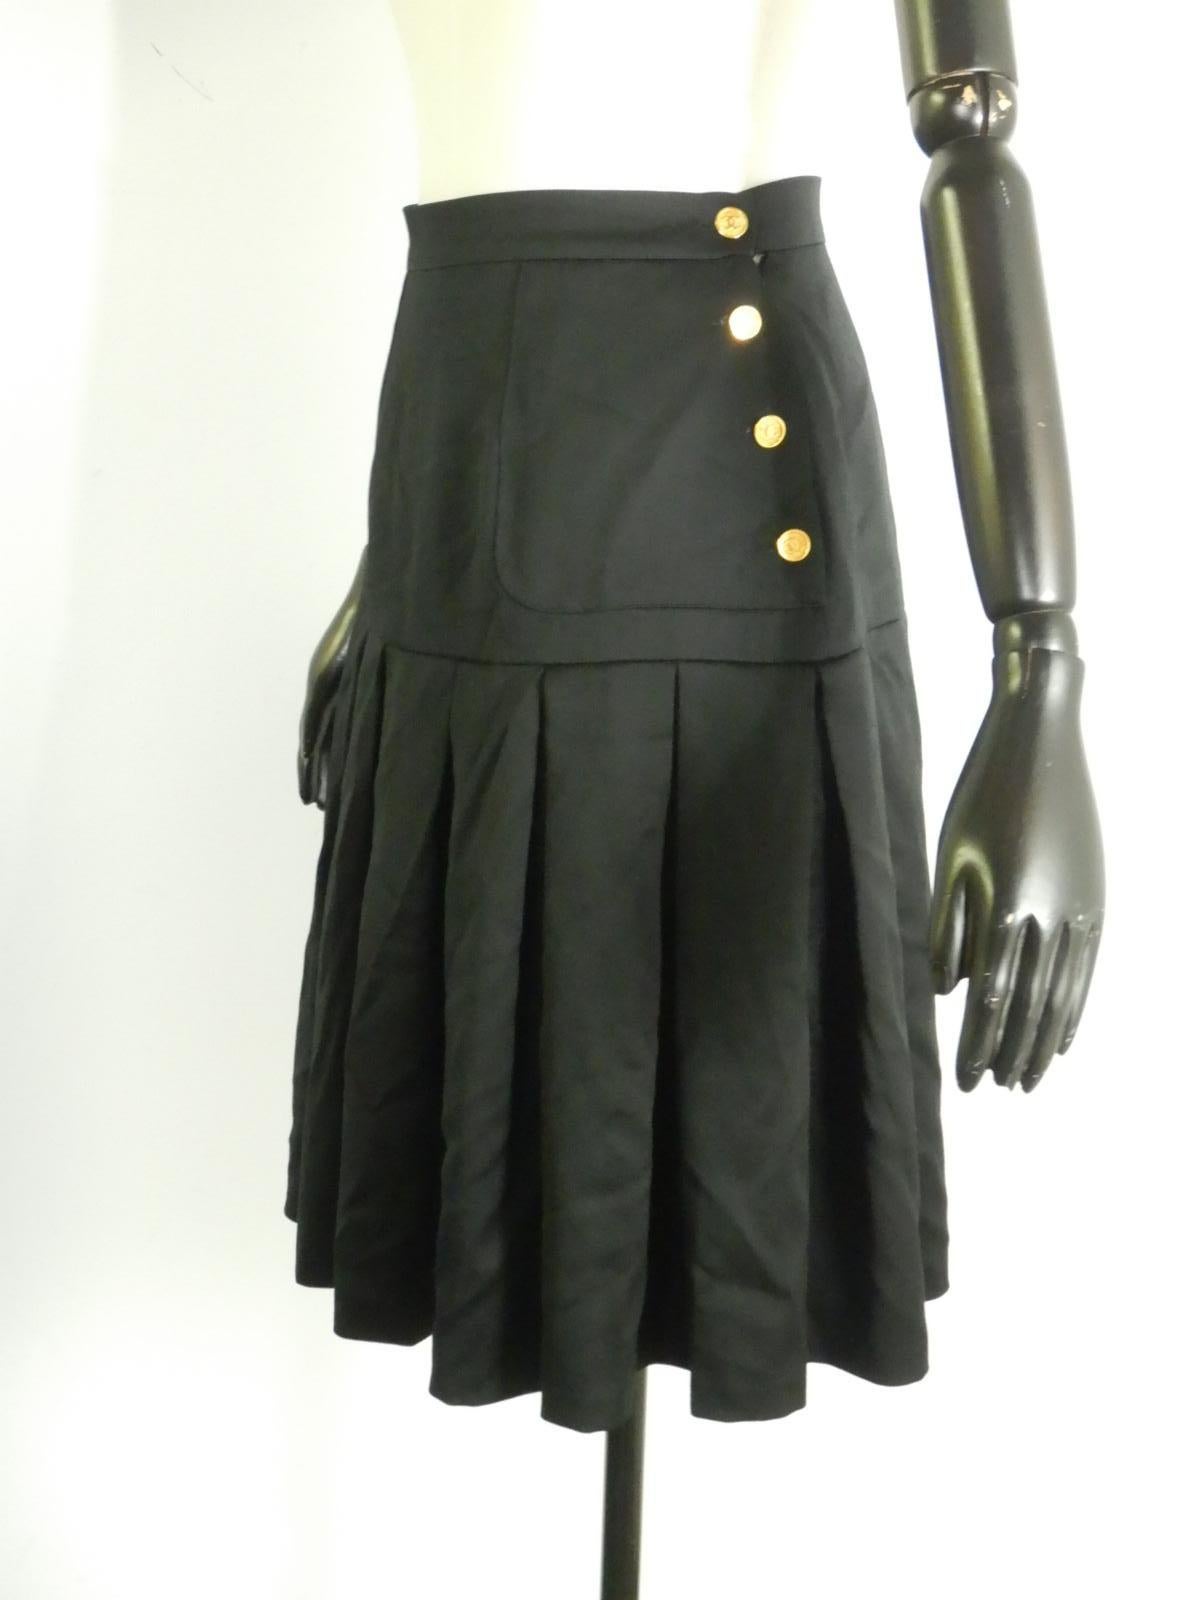 Chanel smooth-finish pleated black wool skirt with 8 gold tone CC logo buttons and side zip closure. Logo-printed silk lining.

The skirt is tagged size 40. The measurements are shown in the photos.

The skirt is in good vintage condition with no